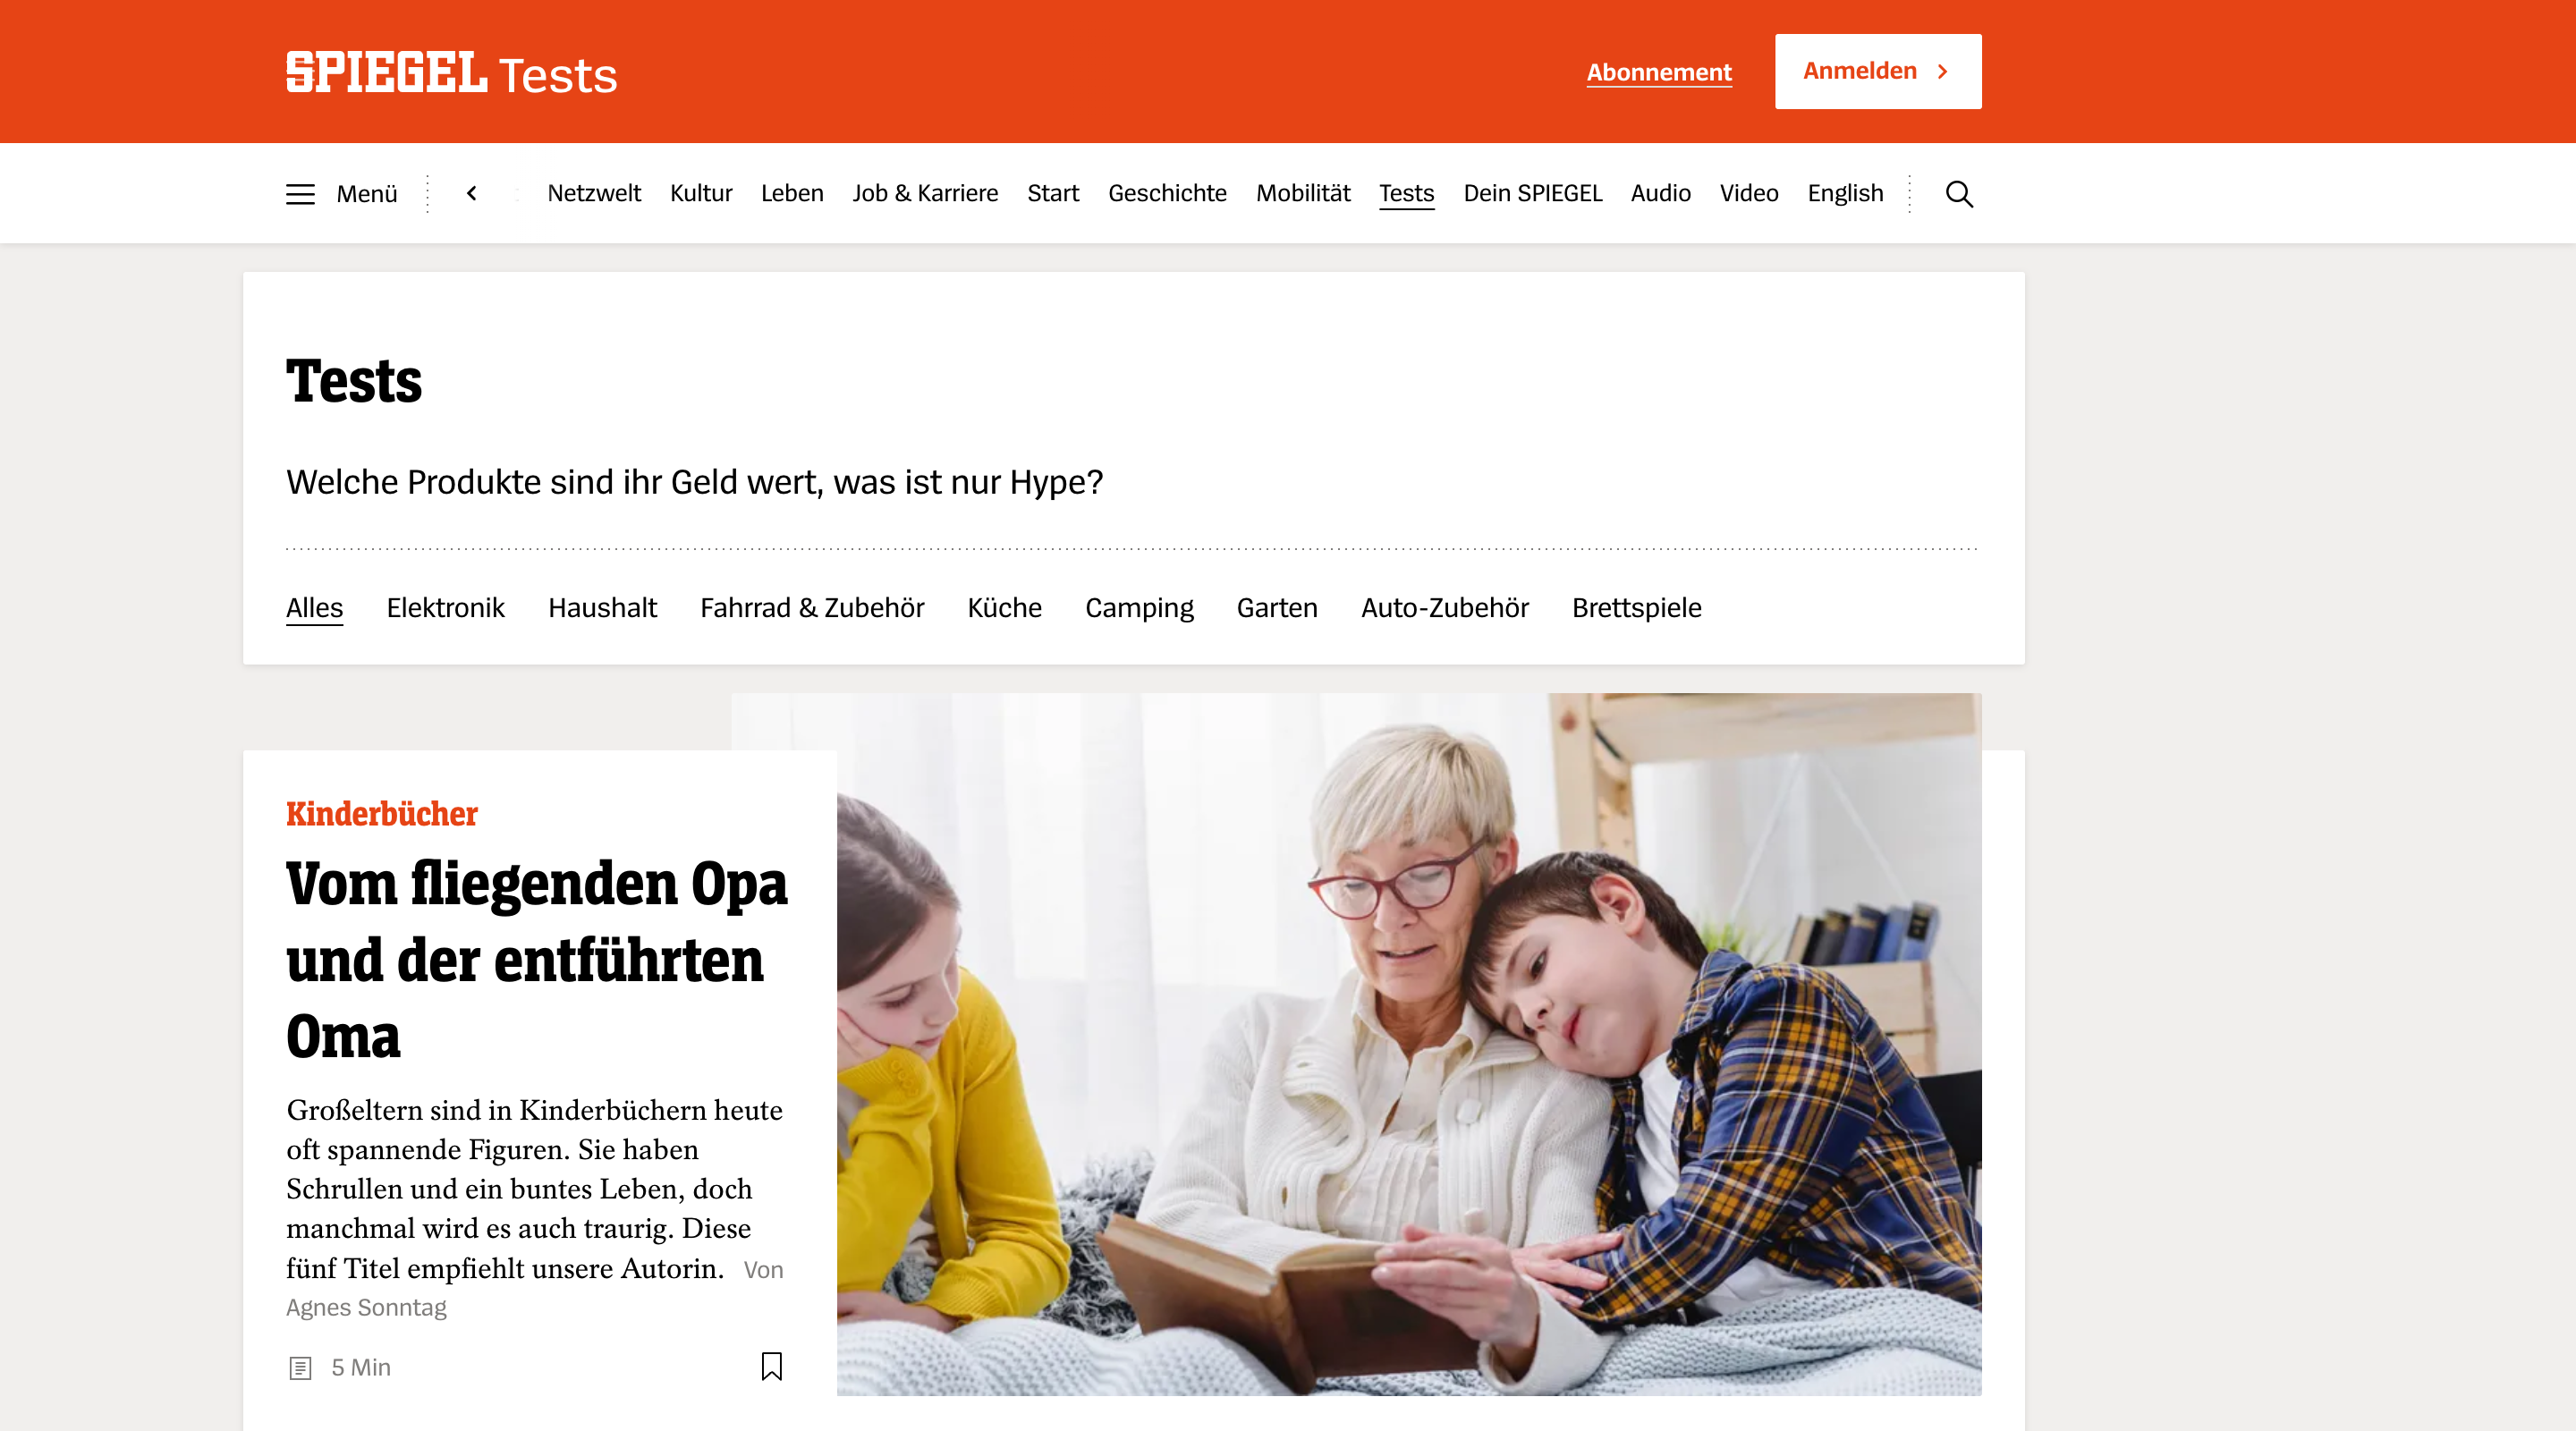 Screenshot of the Der Spiegel 'Tests' page. The header contains the Spiegel logo and main site navigation. Underneath is the page title and a list of categories in a row. Below that there is a featured article with a title and summary on the left, and a large image on the right.